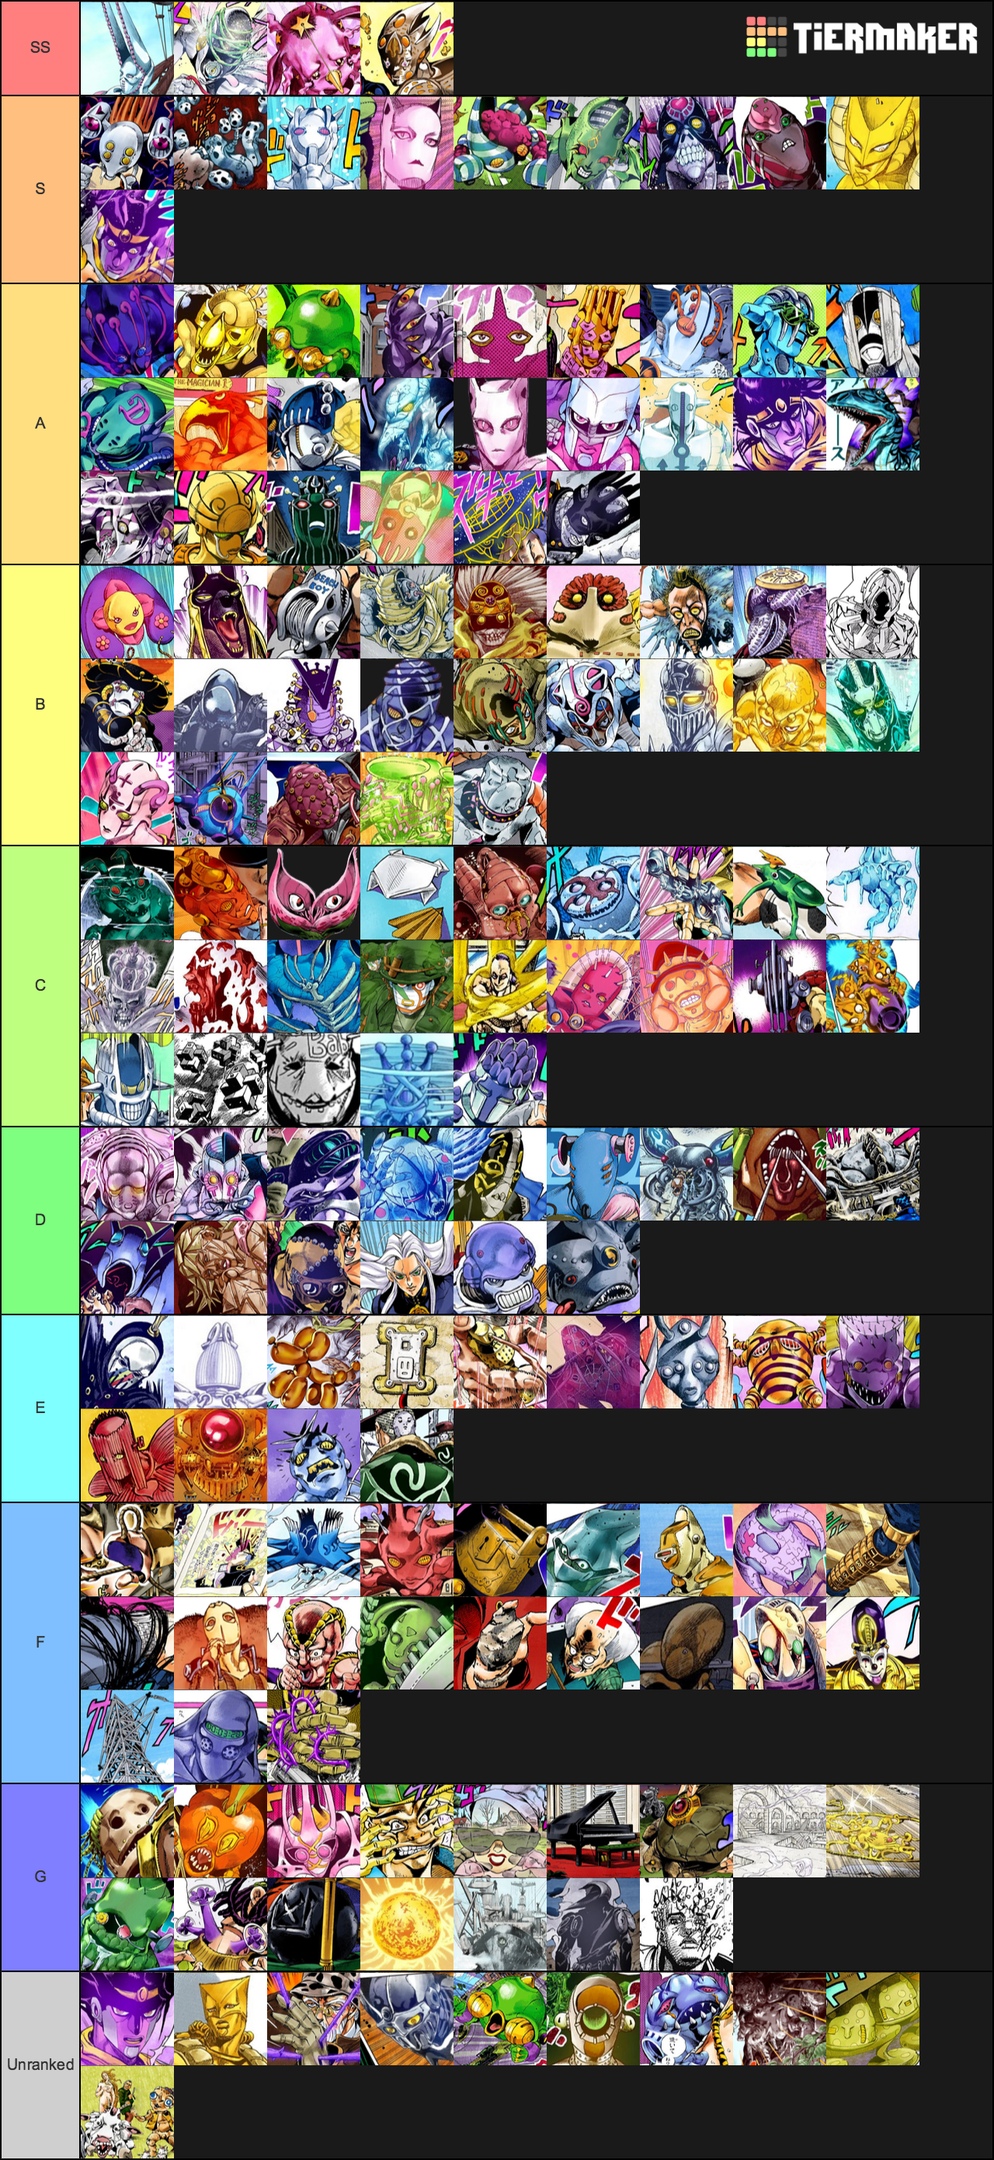 I Made A Stand Tier List Sorry For Not The Best Quality Some Things Should Also Be Improved Fandom - roblox anime games tier list community rank tiermaker